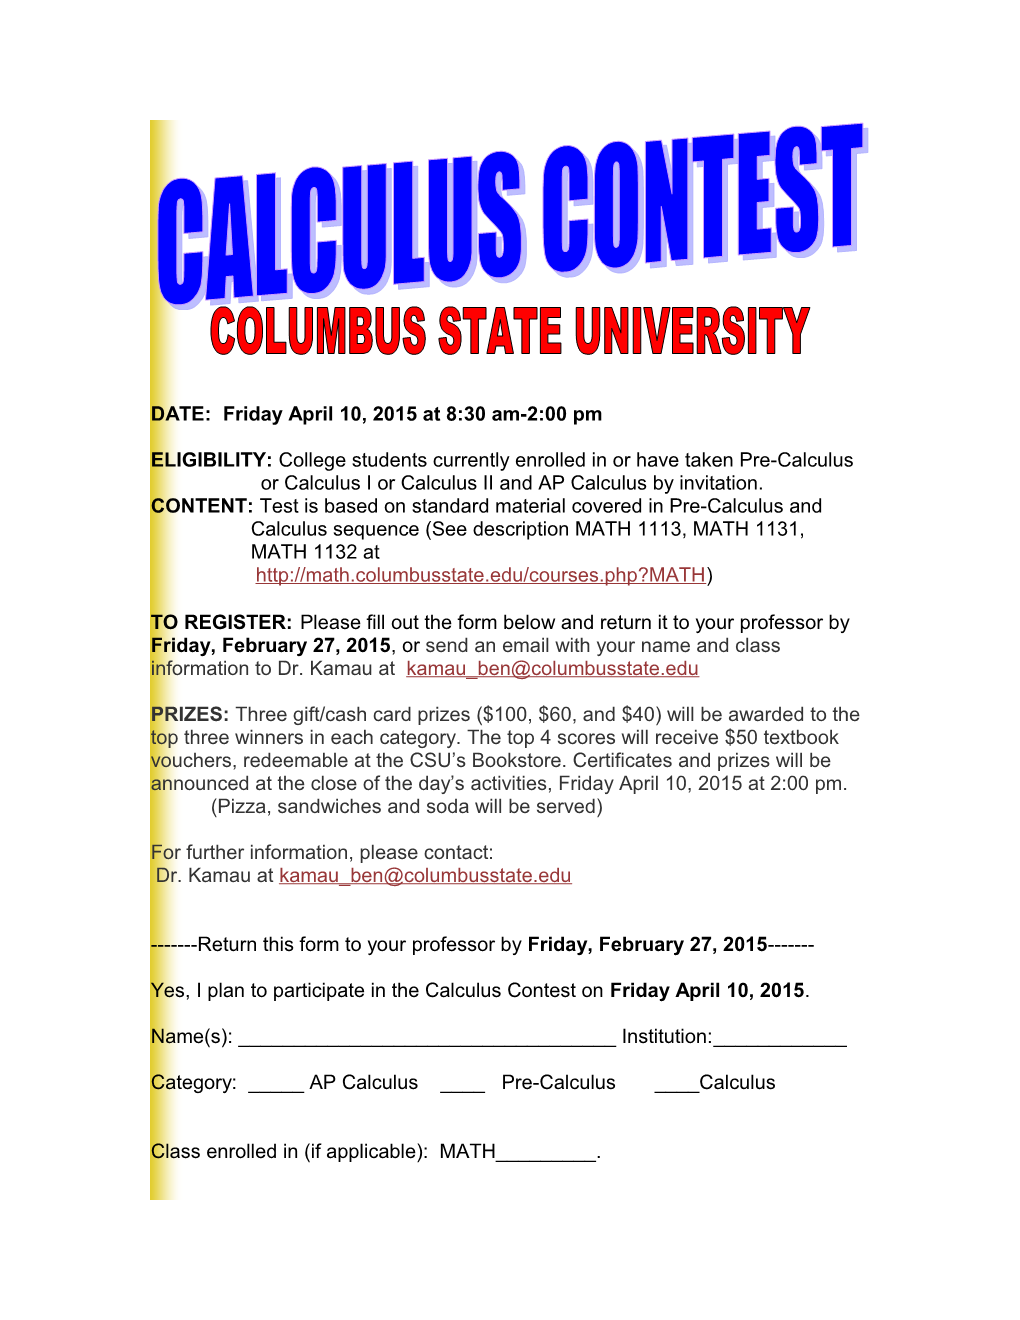 ELIGIBILITY: College Students Currently Enrolled in Or Have Taken Pre-Calculus